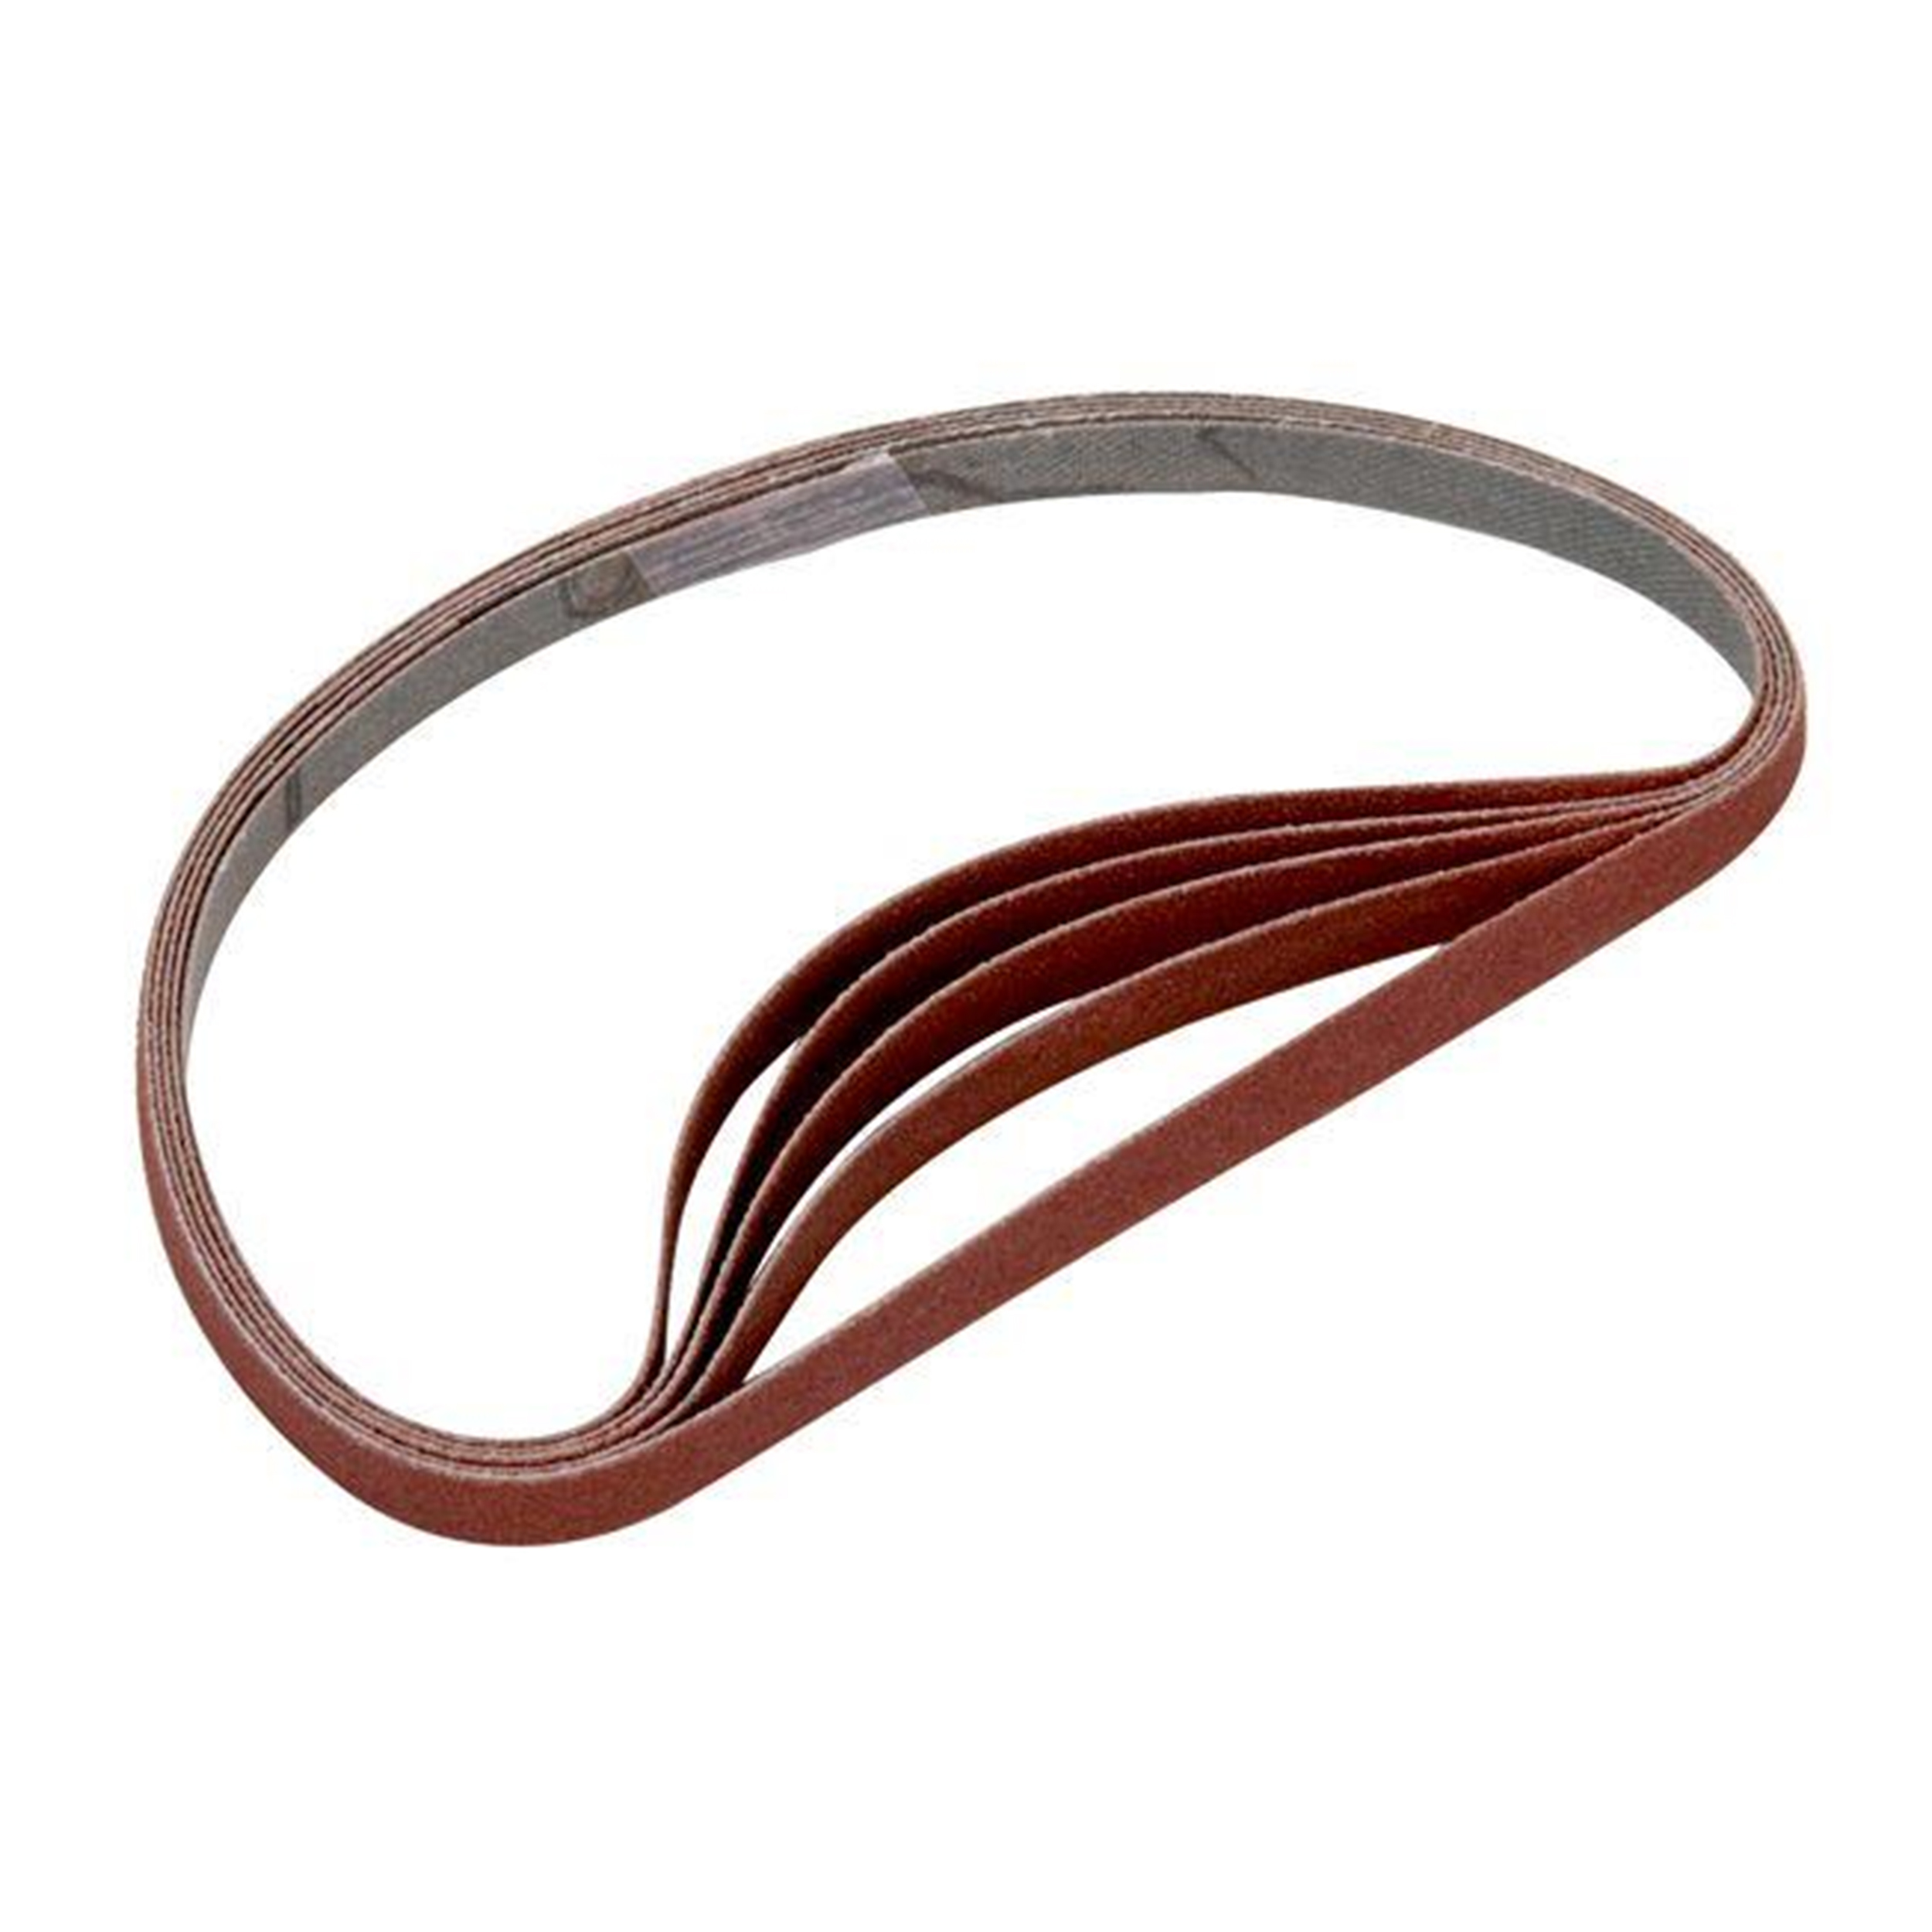 Sanding Stick Replacement Belts, 180 Grit, 5 Pack